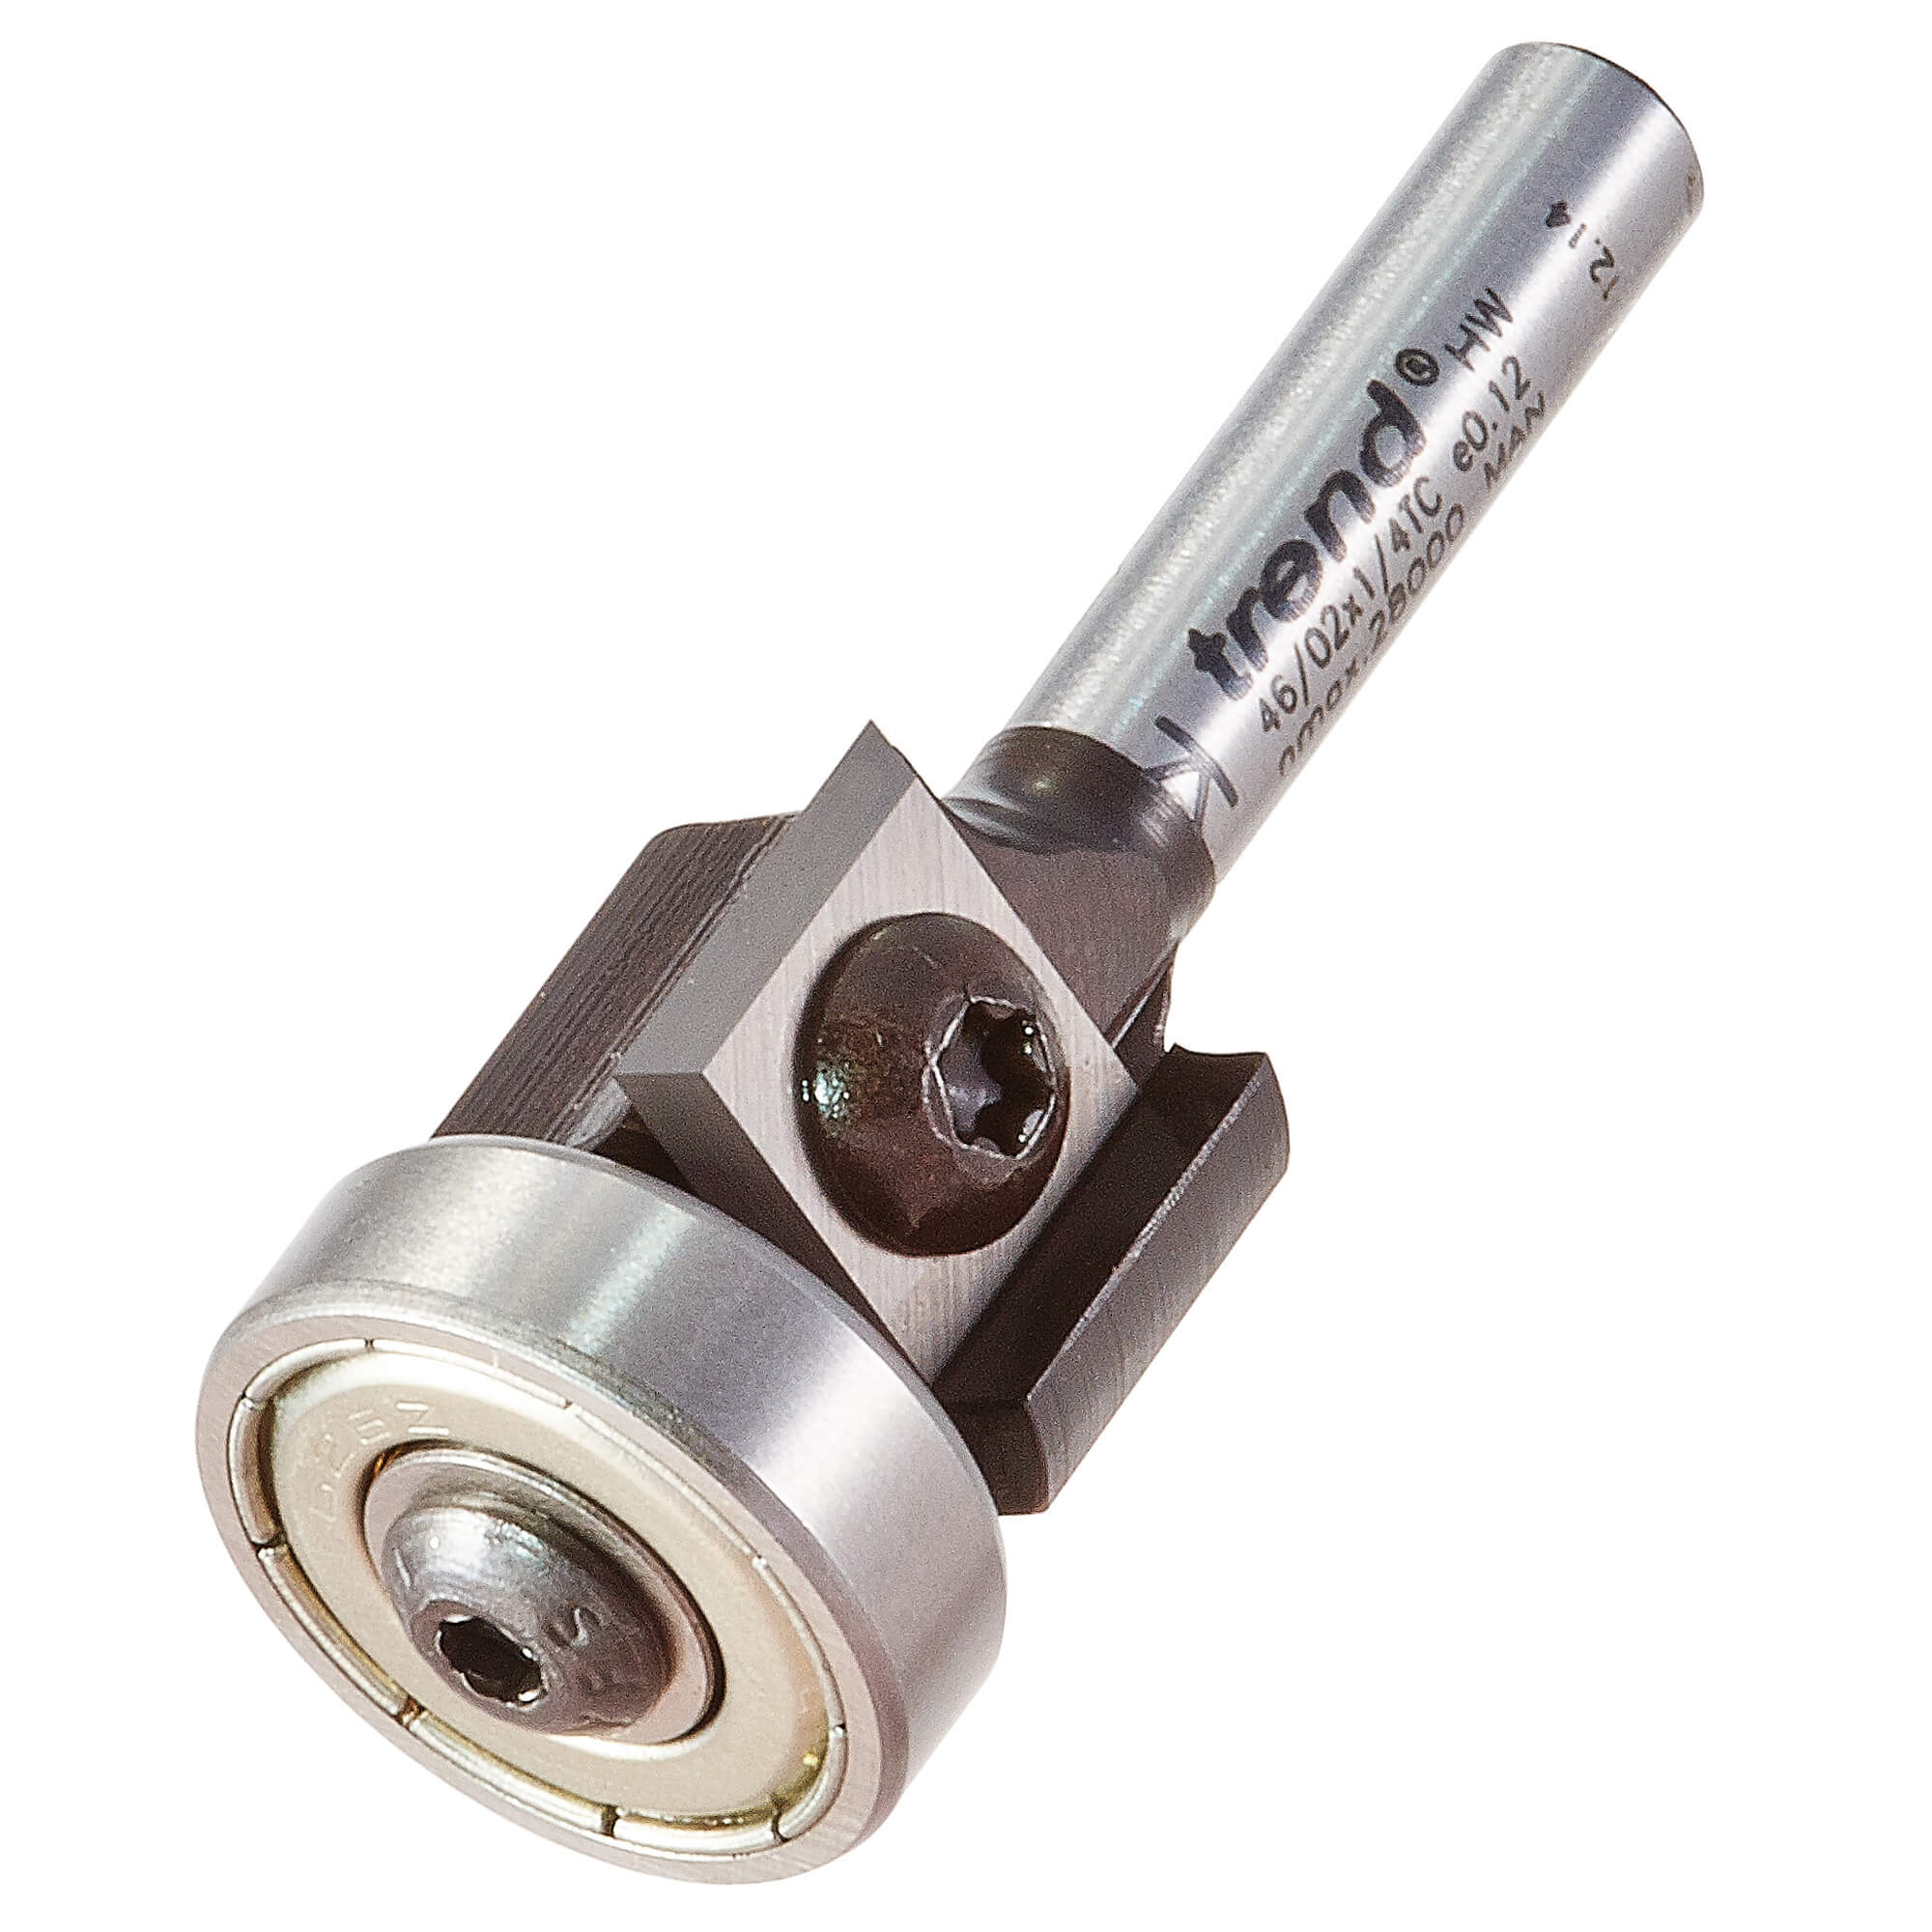 Image of Trend Rotatip Trimmer Bearing Guided Router Cutter 19mm 12mm 1/4"